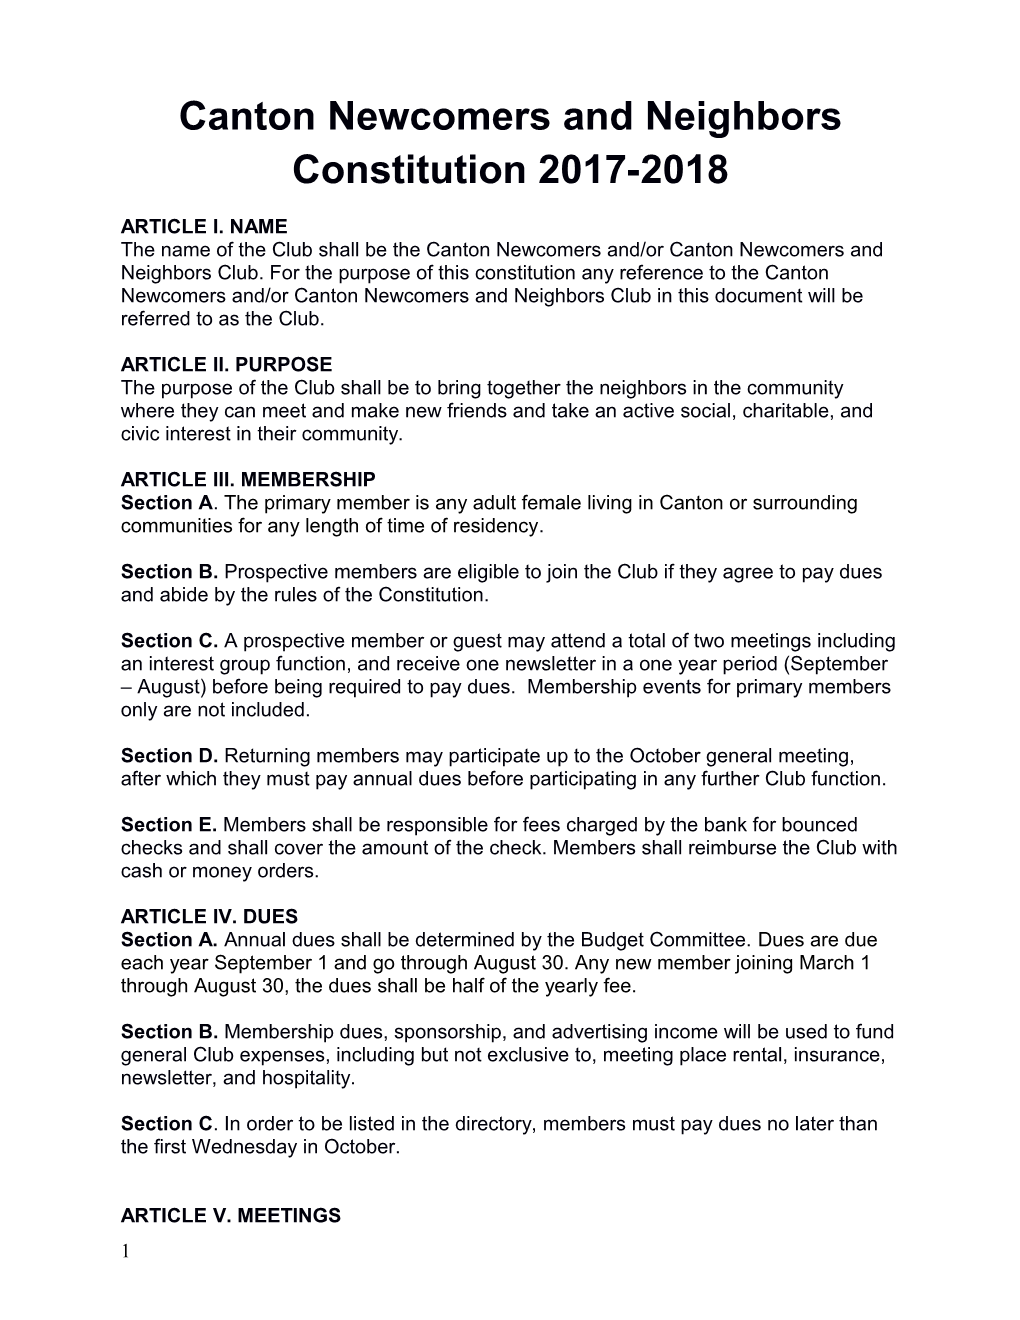 Canton Newcomers and Neighbors Constitution 2017-2018